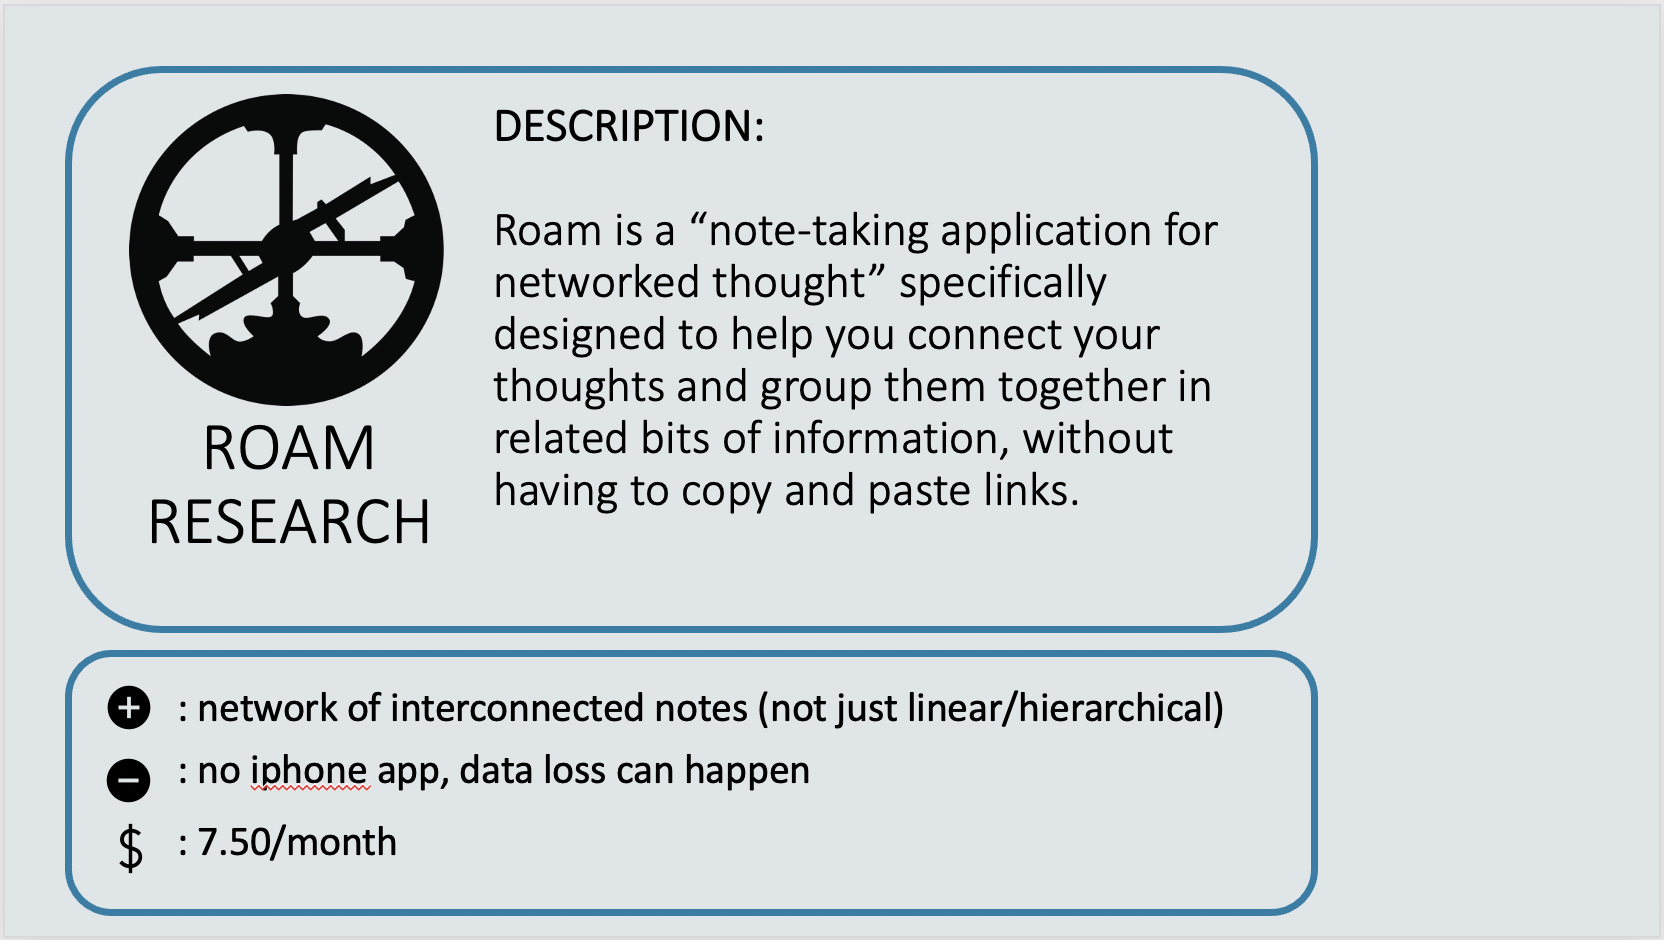 ROAM RESEARCH - Roam is a “note-taking application for networked thought” specifically designed to help you connect your thoughts and group them together in related bits of information, without having to copy and paste links.   Positive: Network of interconnected notes (not just linear/hierarchical). Negative: no iphone app, data loss can happen. Cost: $7.50 per month